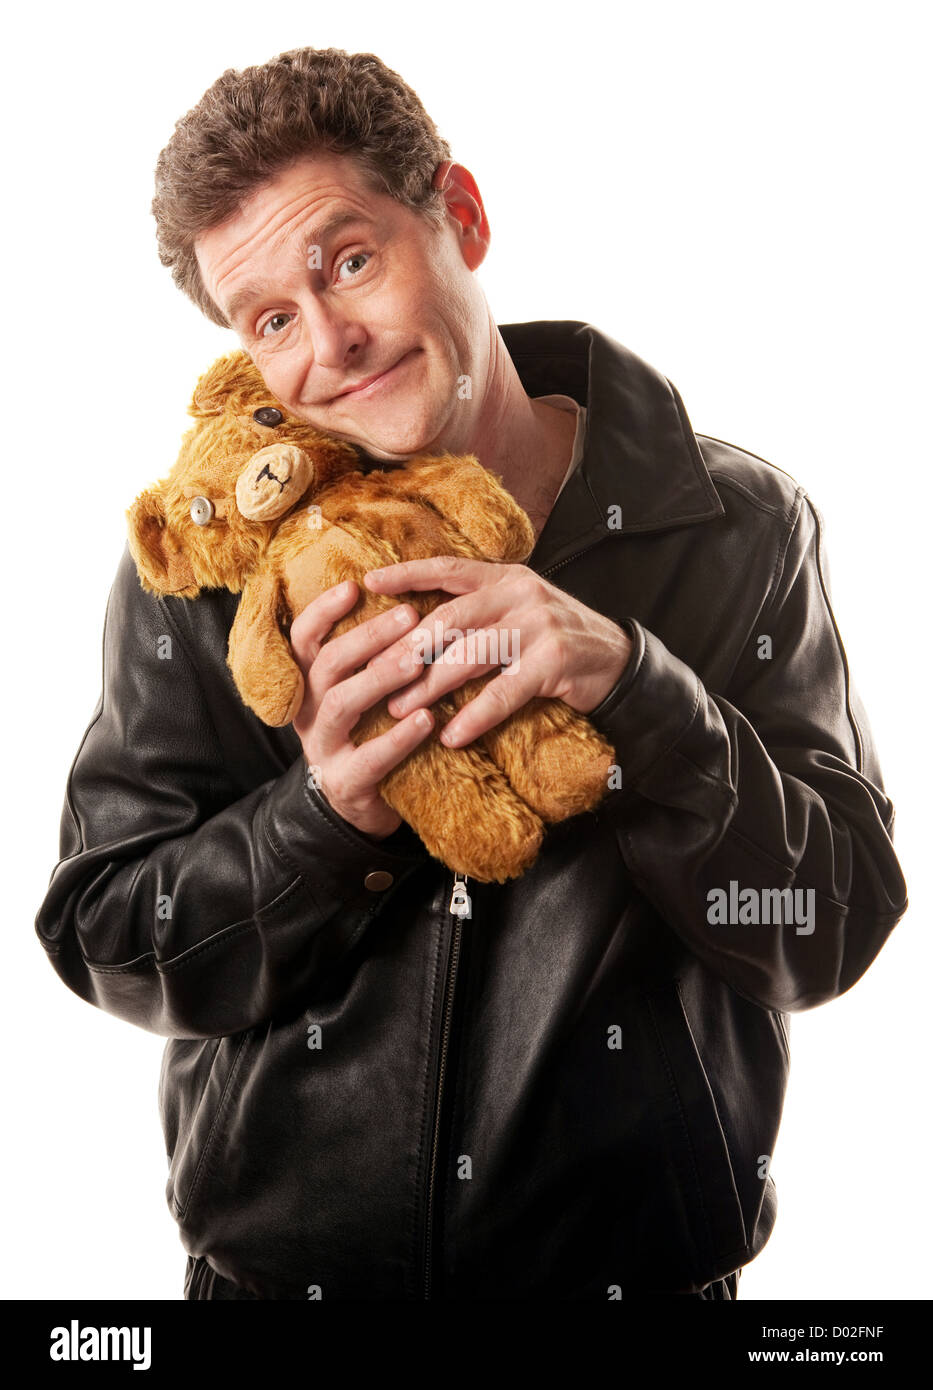 Man in leather jacket clasps teddy bear Stock Photo